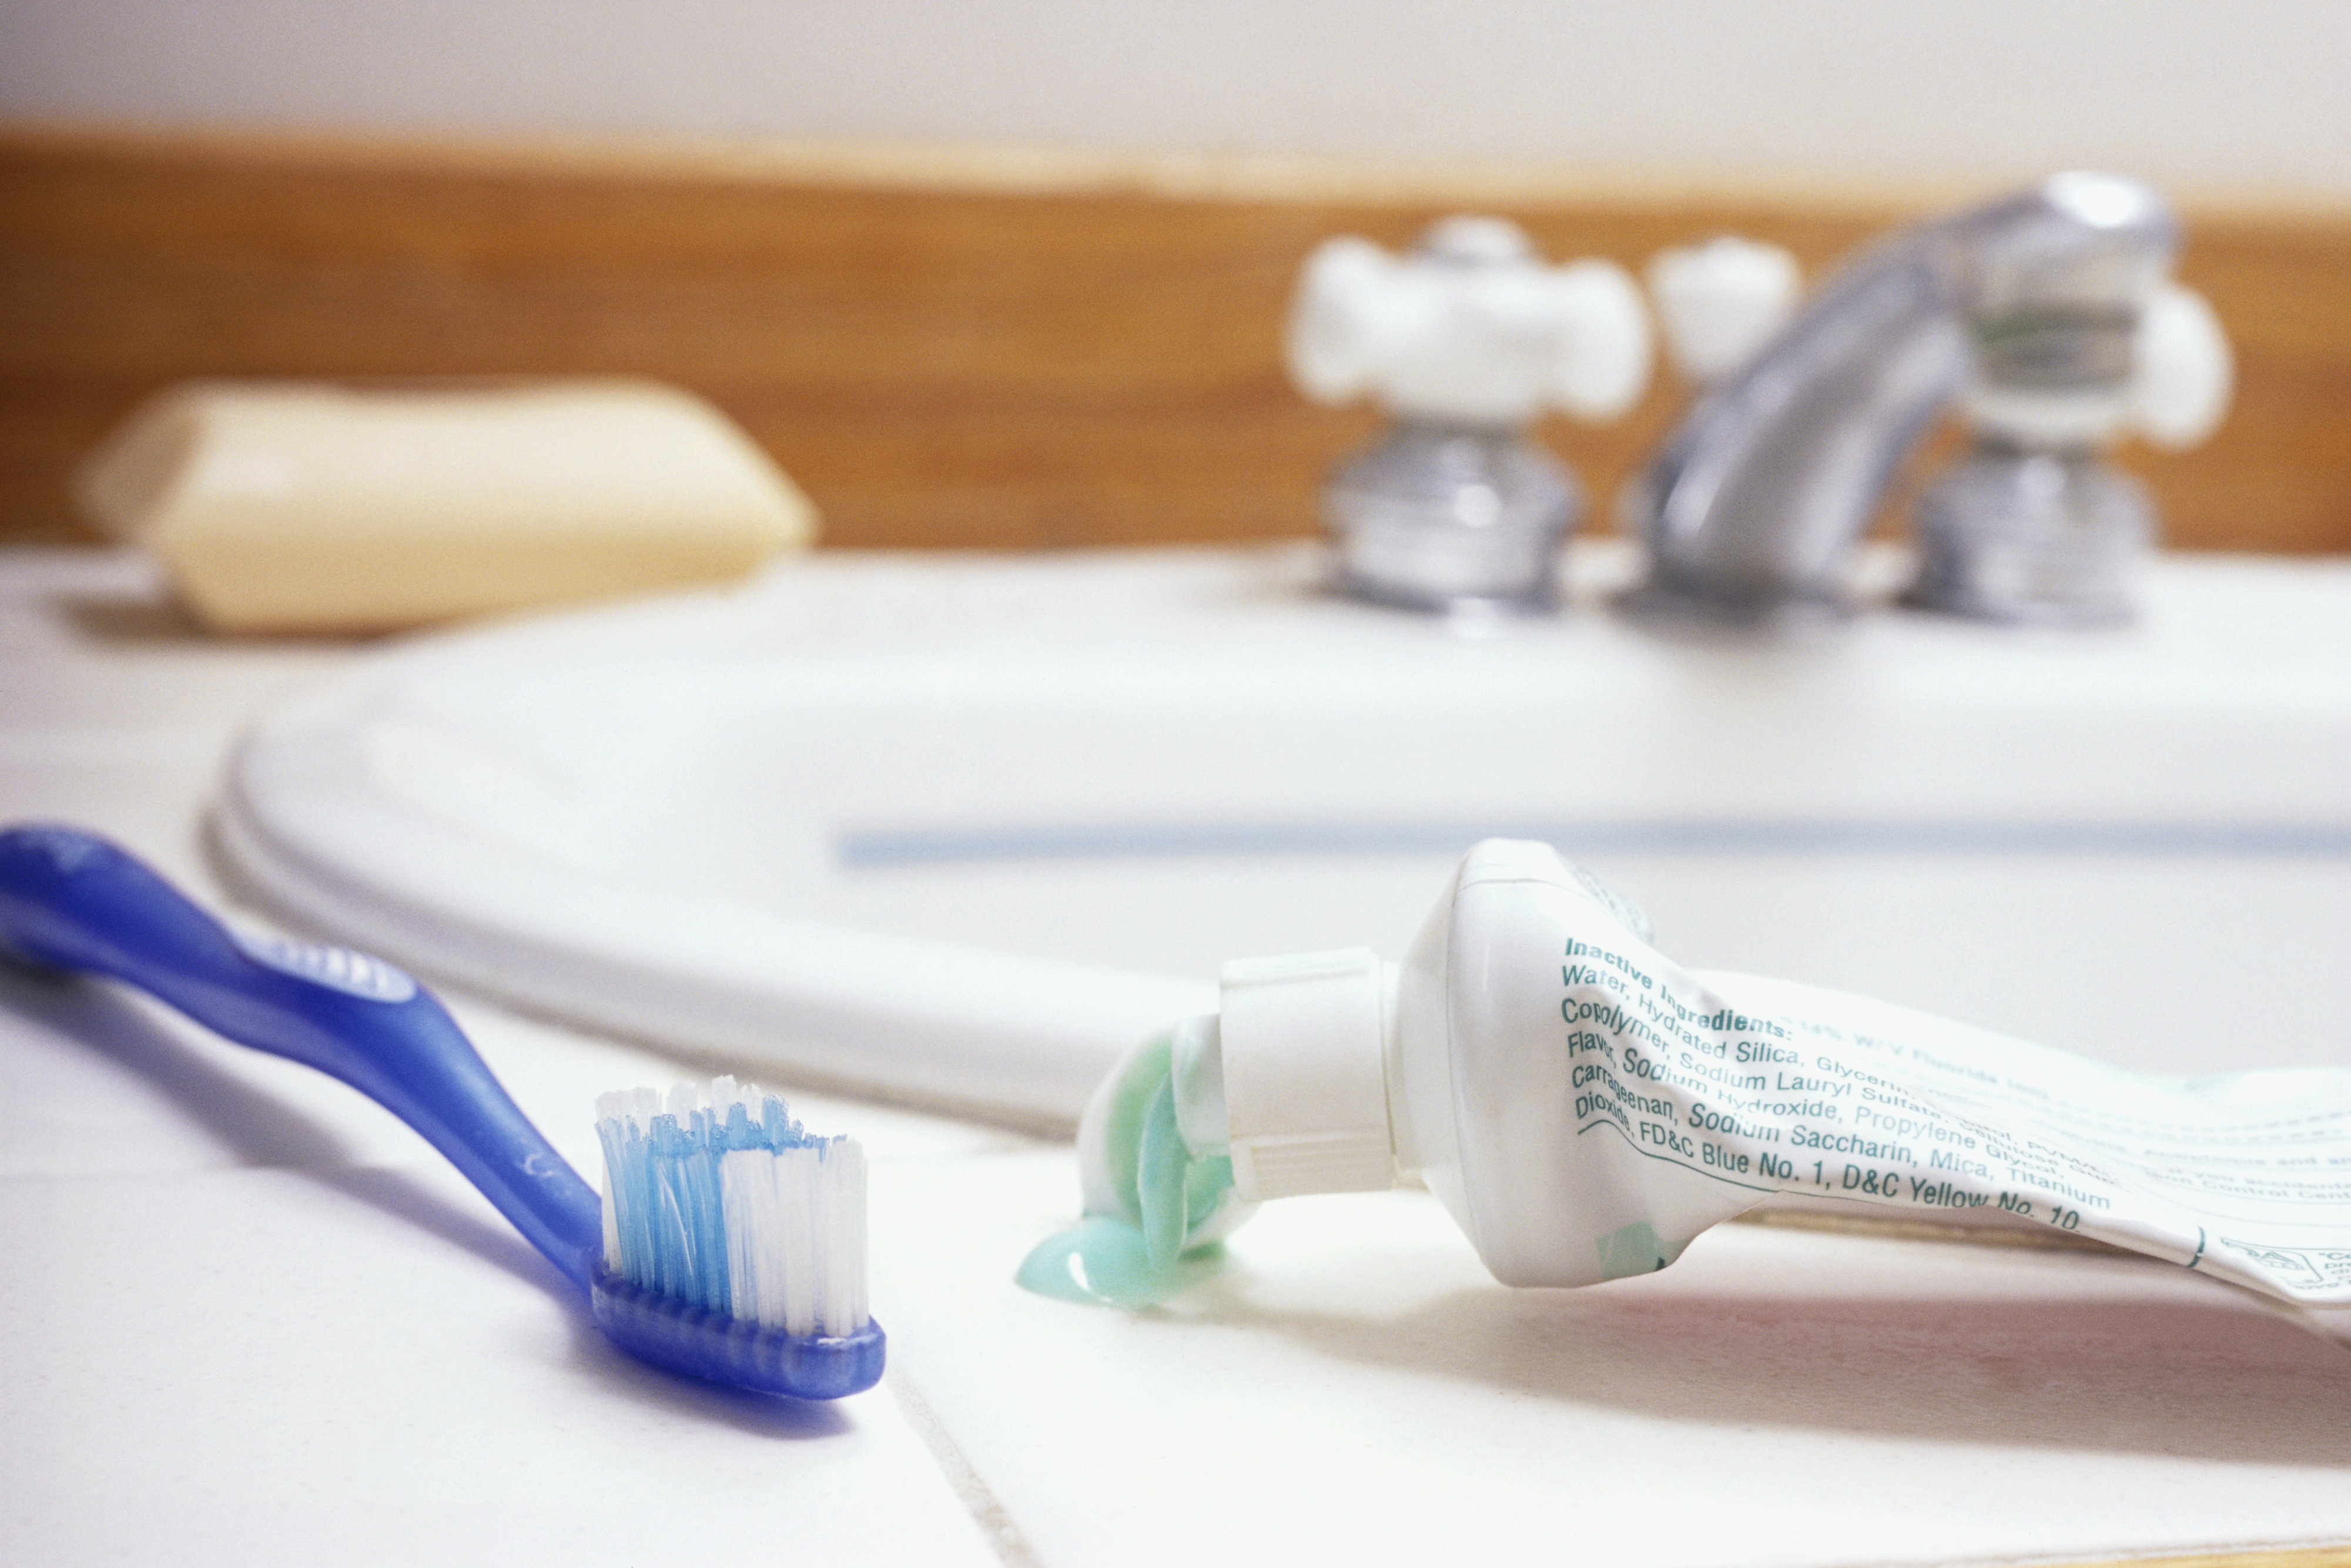 Toothbrush and toothpaste on a bathroom counter indicating shared hygiene, possibly a couple&#x27;s routine